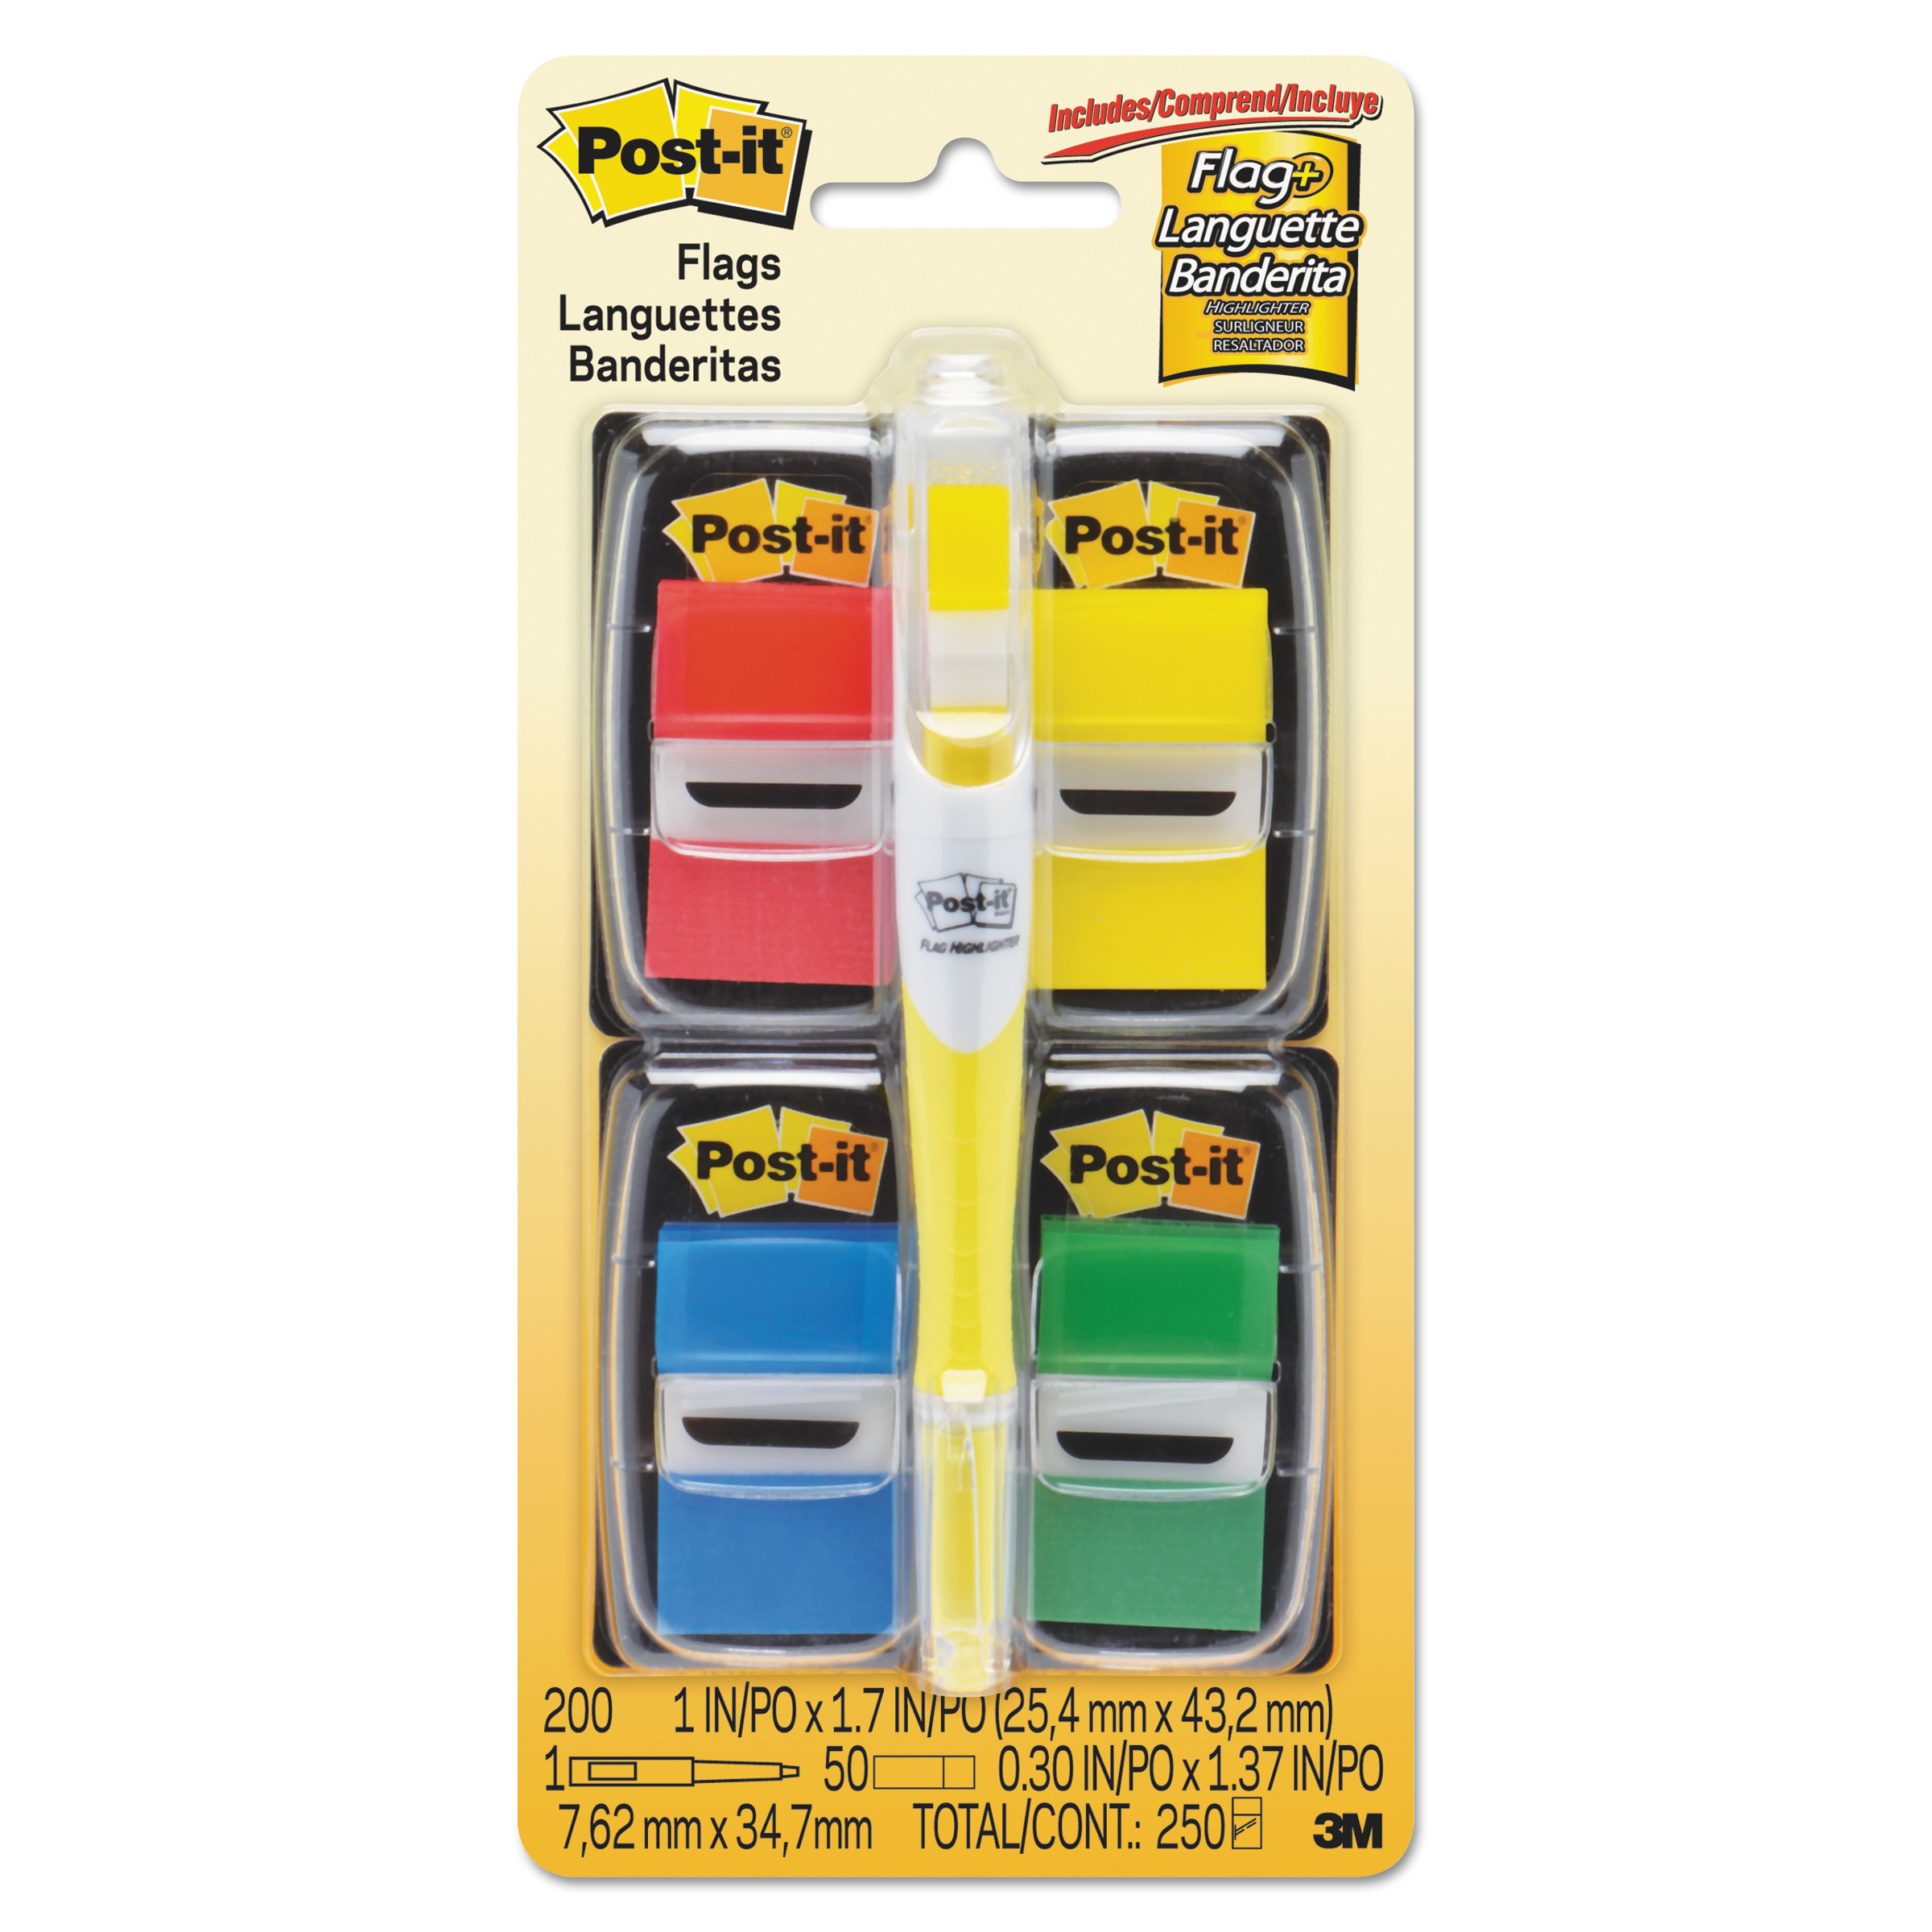  Post-it Flags 680-RYBGVA Page Flag Value Pack, Assorted, 200 1 Flags + Highlighter with 50 1/2 Flags (MMM680RYBGVA) 